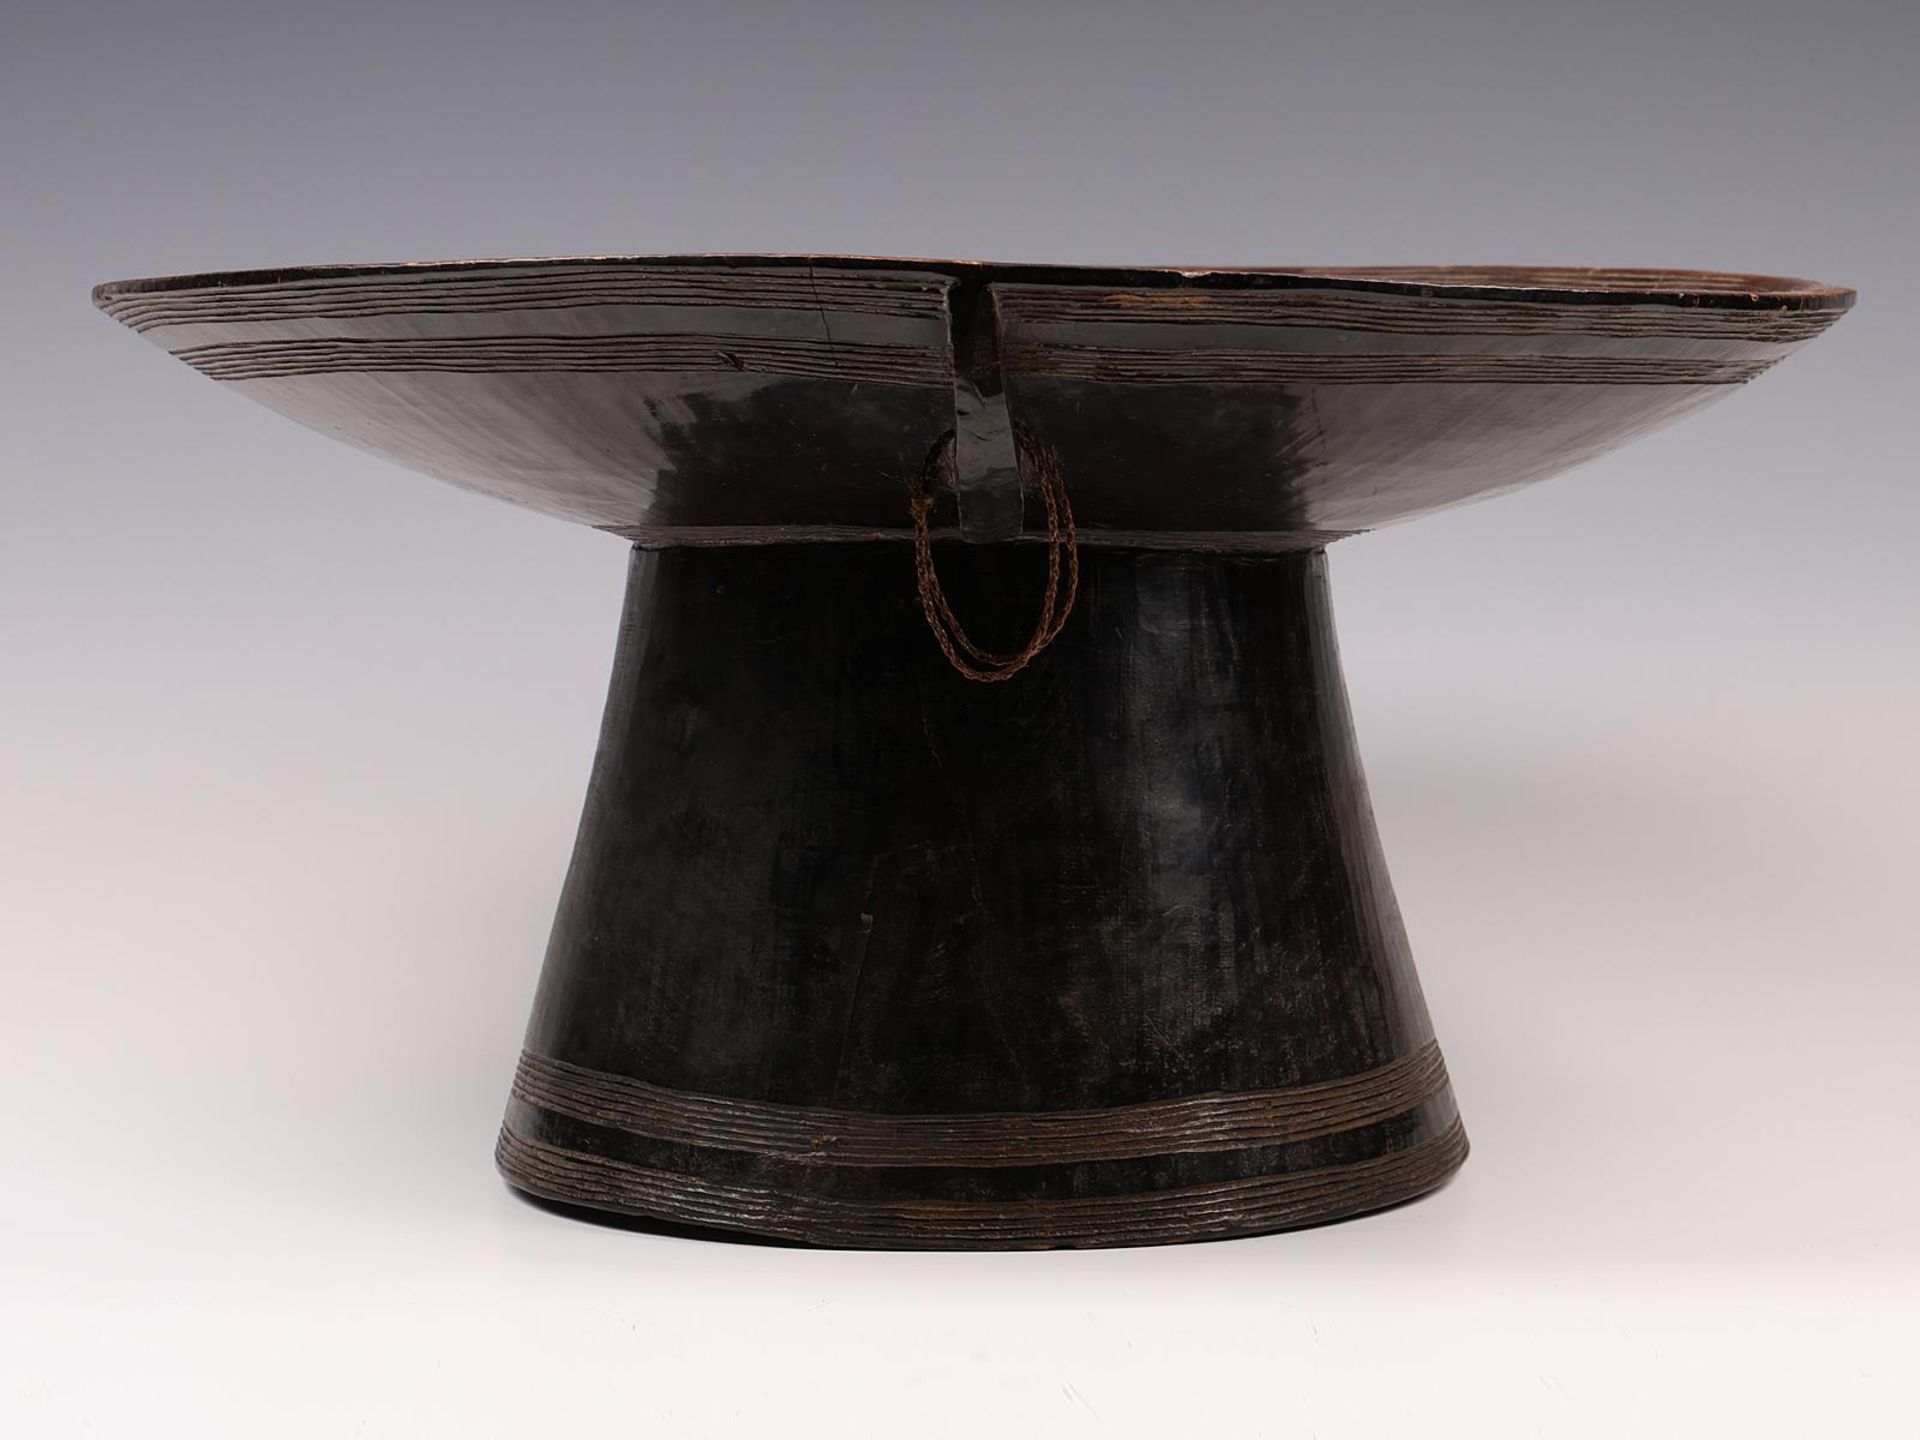 Ethiopia, a fine wooden food platter on a conical stand - Image 3 of 4